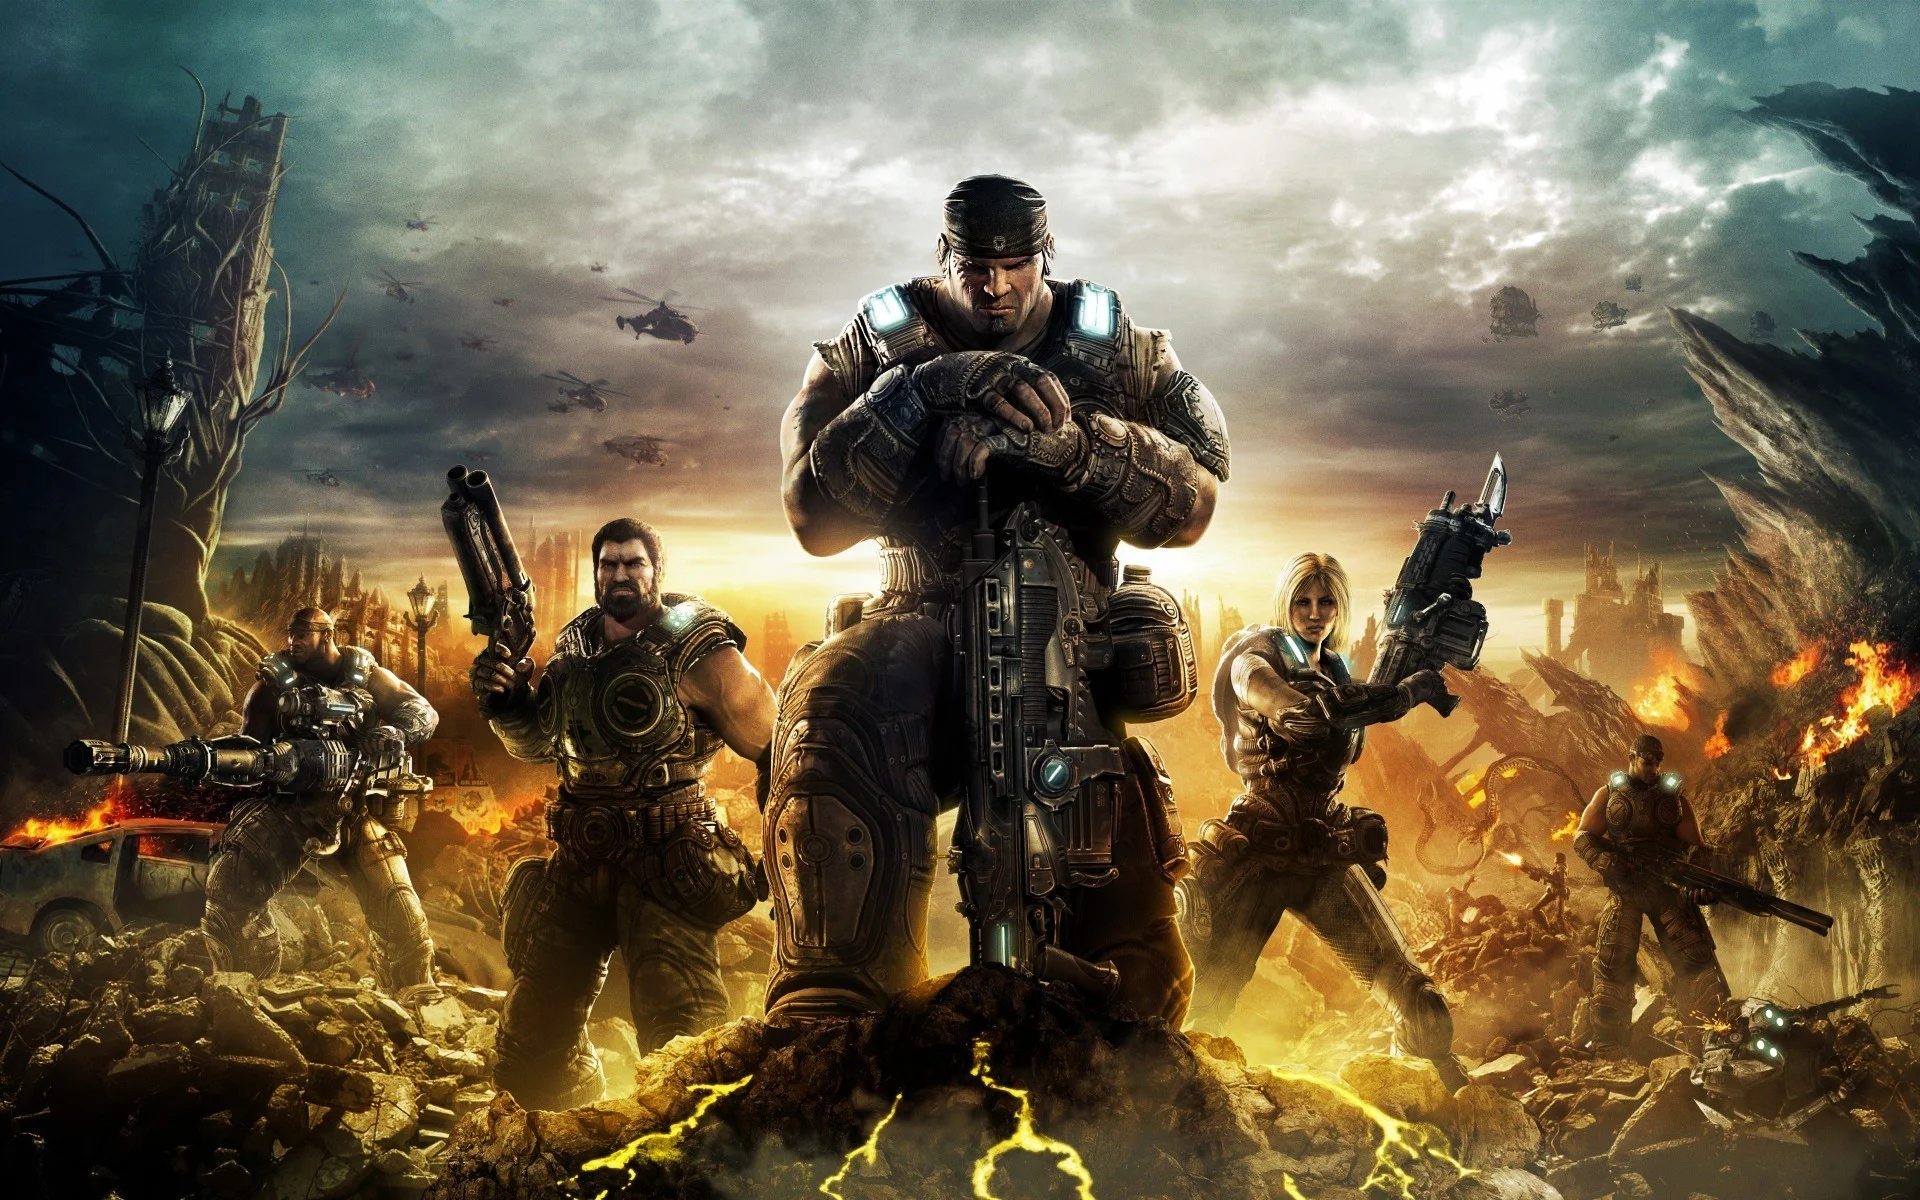 Rumors: The Coalition Studio will focus on the new part of Gears of War